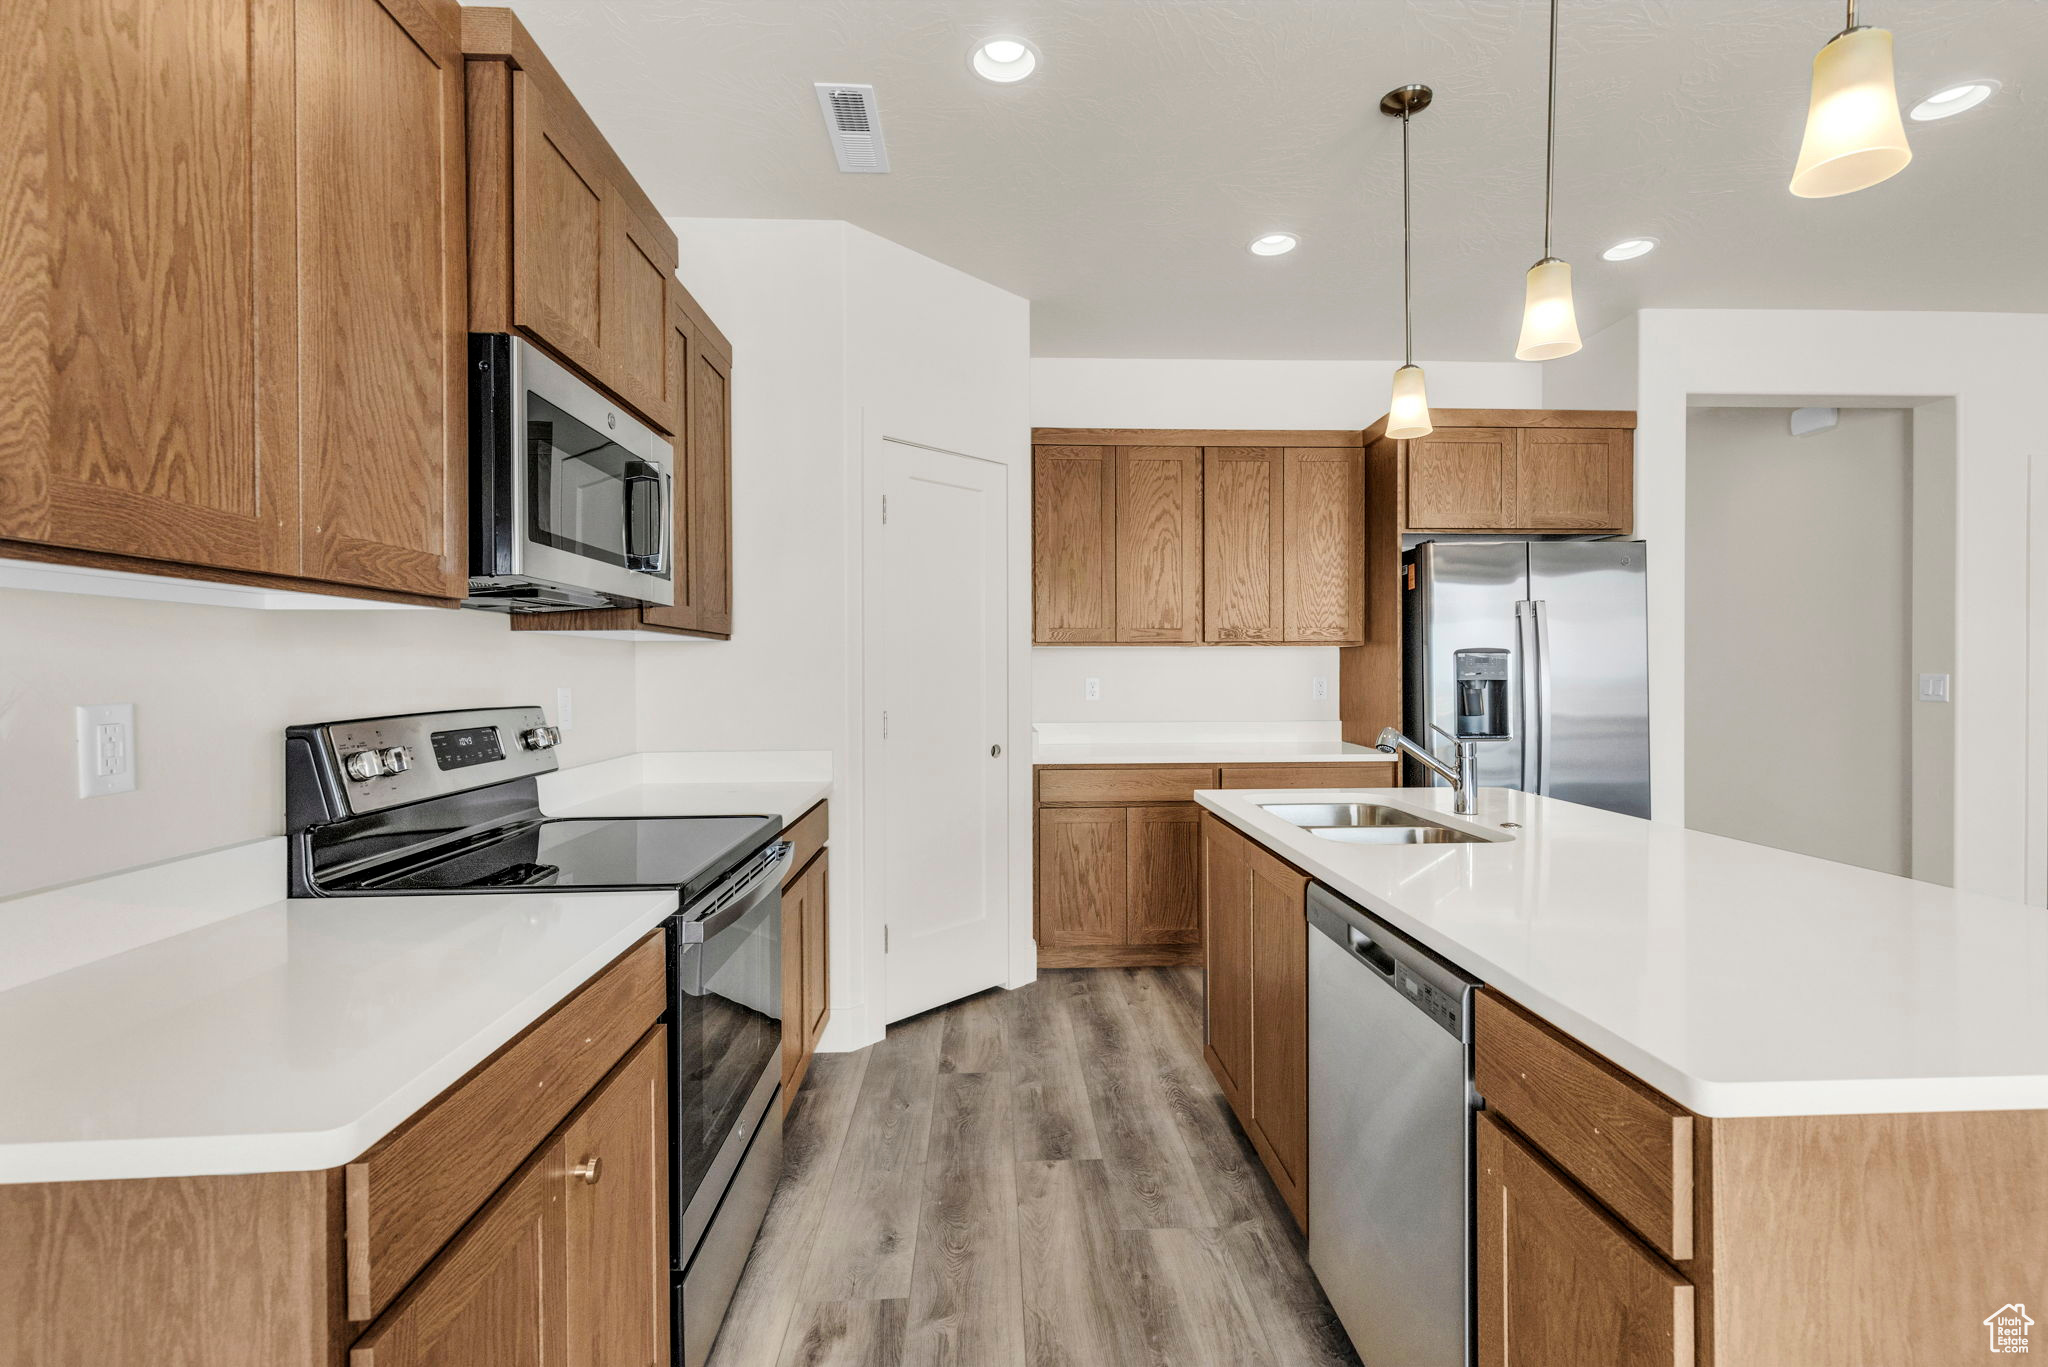 Kitchen with appliances with stainless steel finishes, light hardwood / wood-style floors, an island with sink, sink, and decorative light fixtures